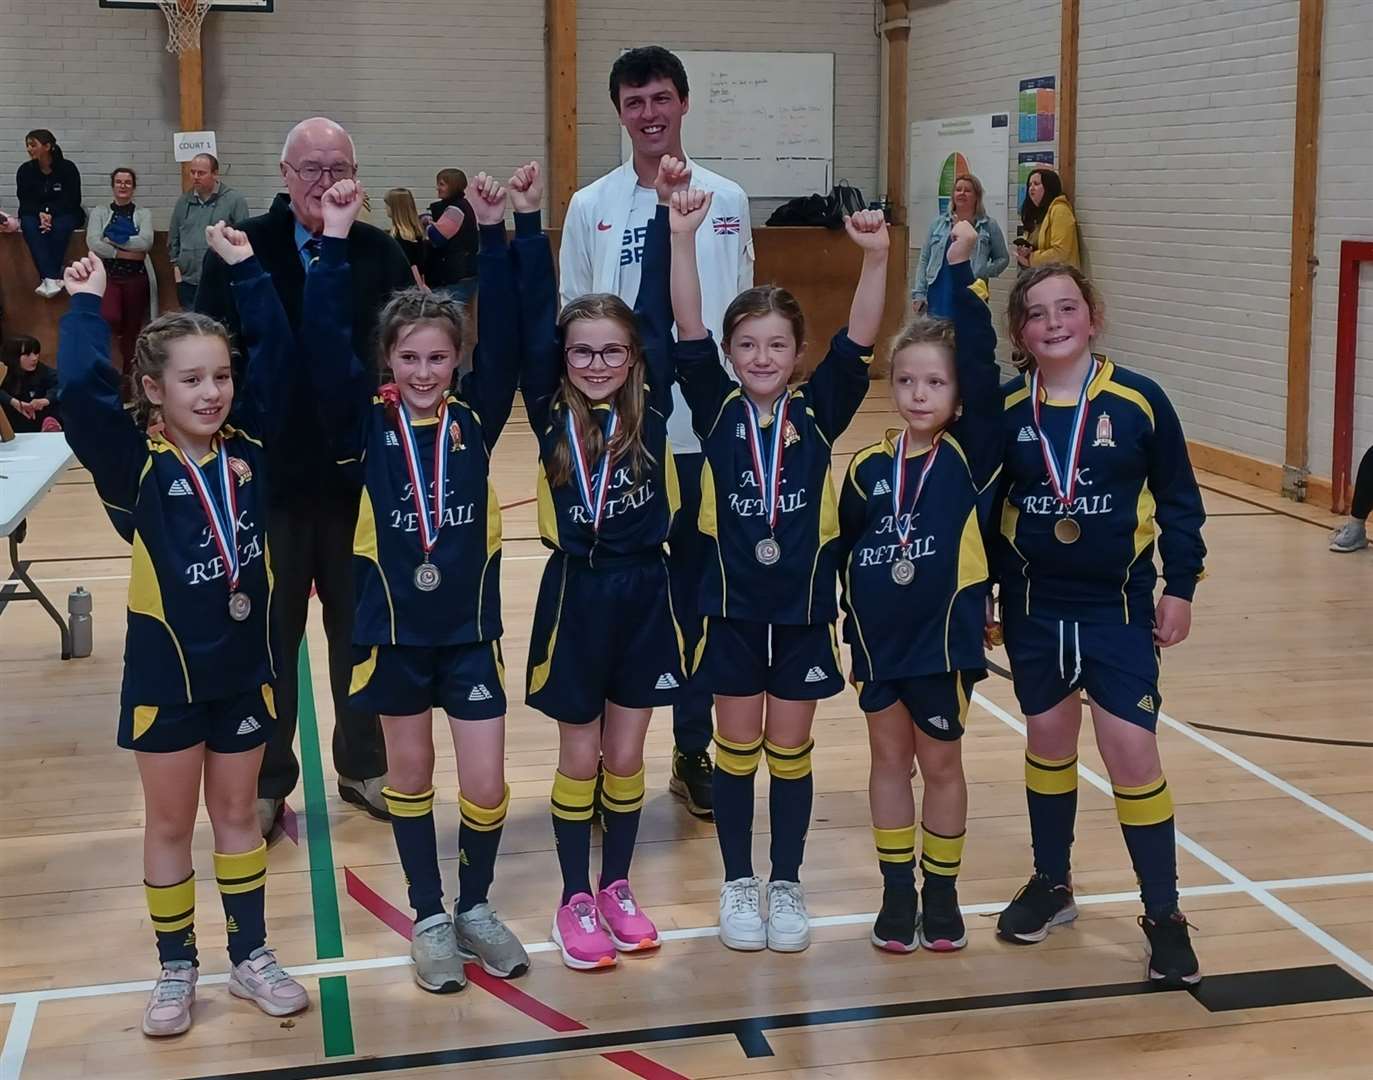 The Golspie girls' team who came second in the Big Schools category.